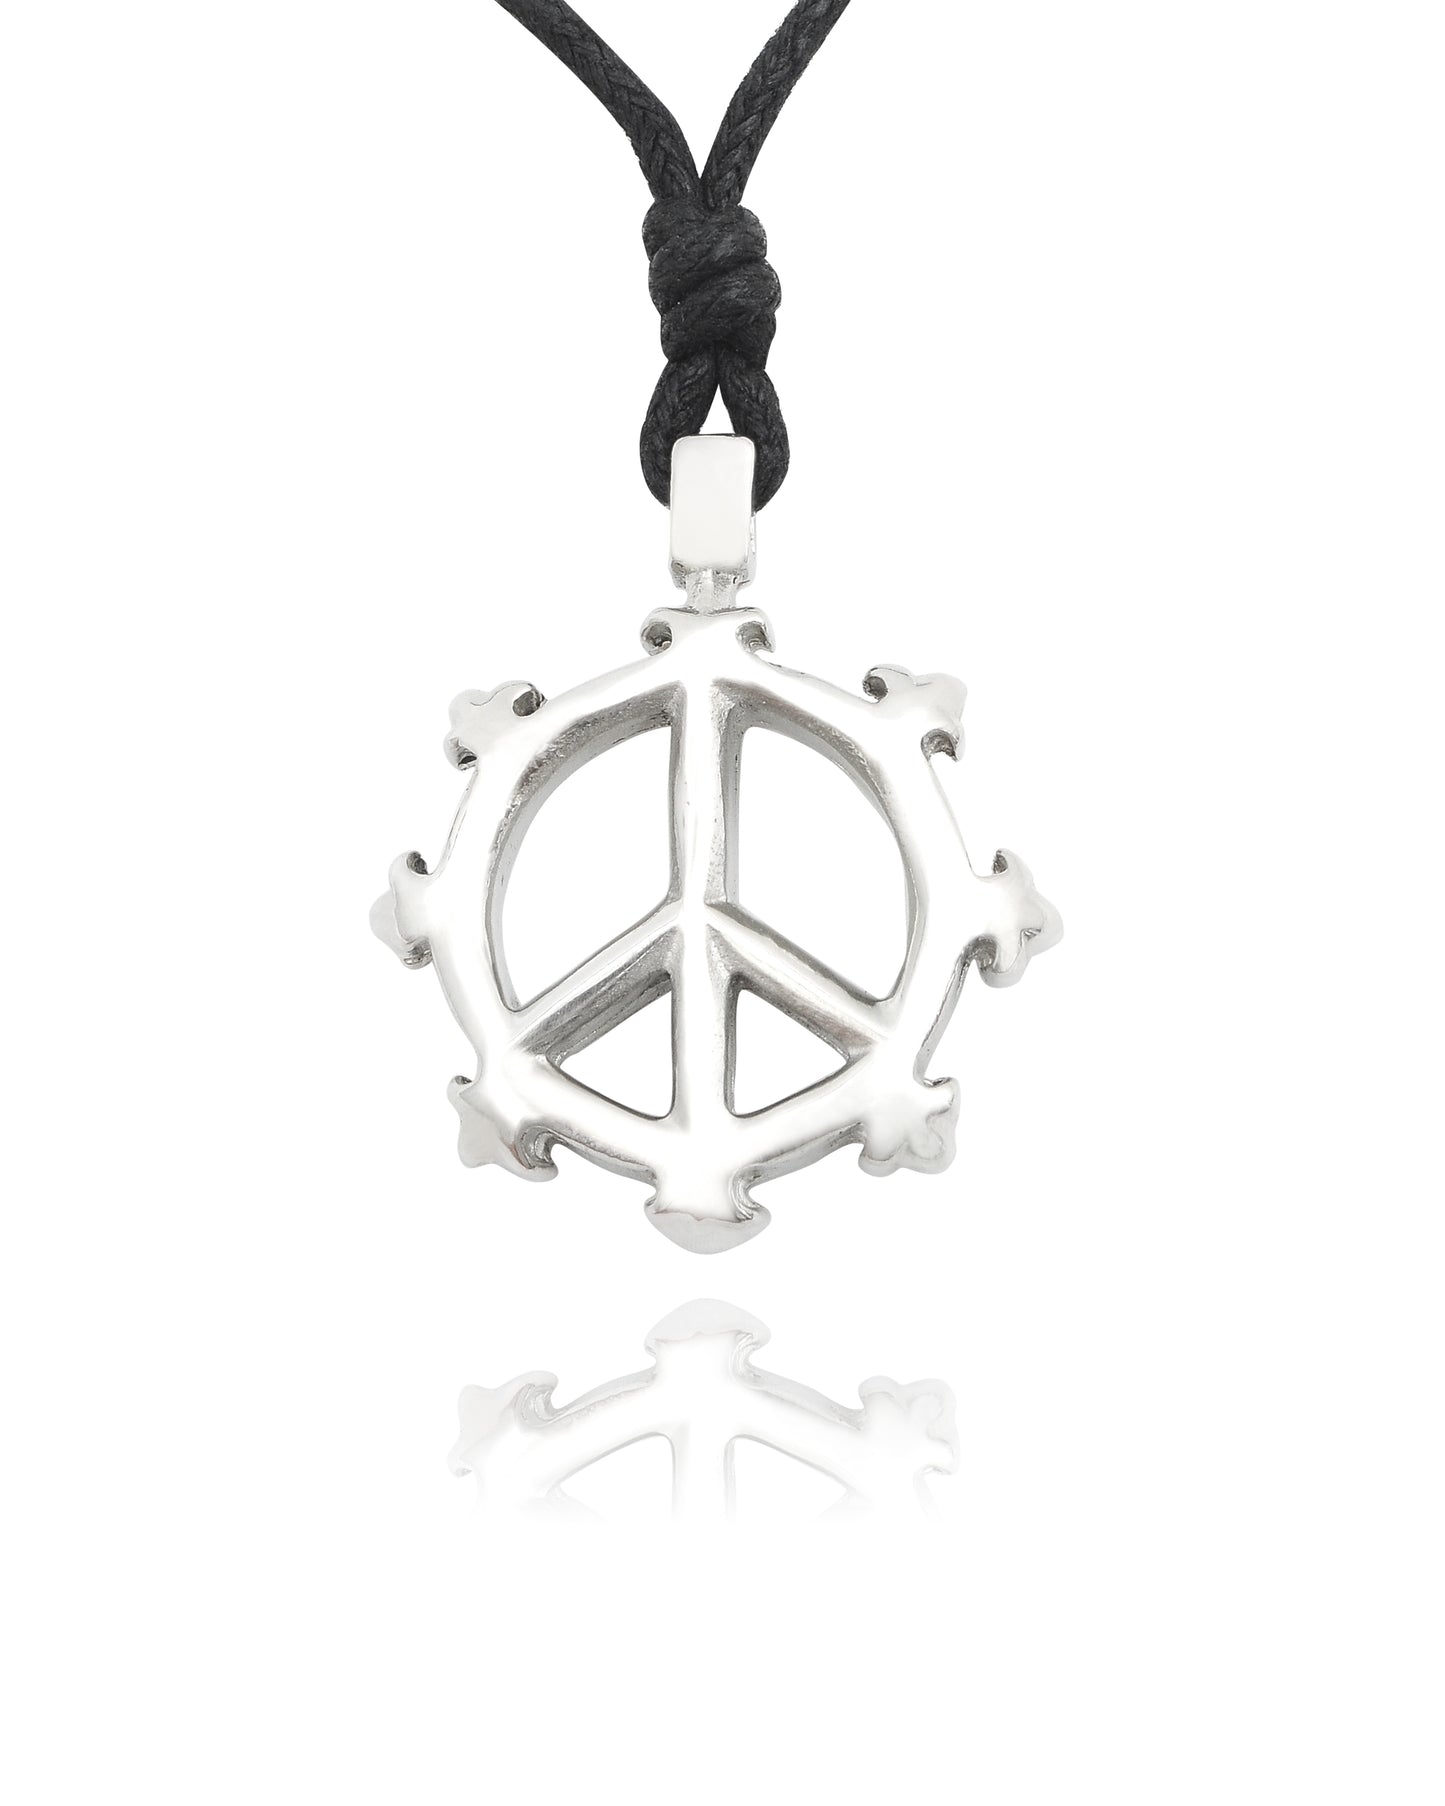 New Peace Sign Silver Pewter Charm Necklace Pendant Jewelry